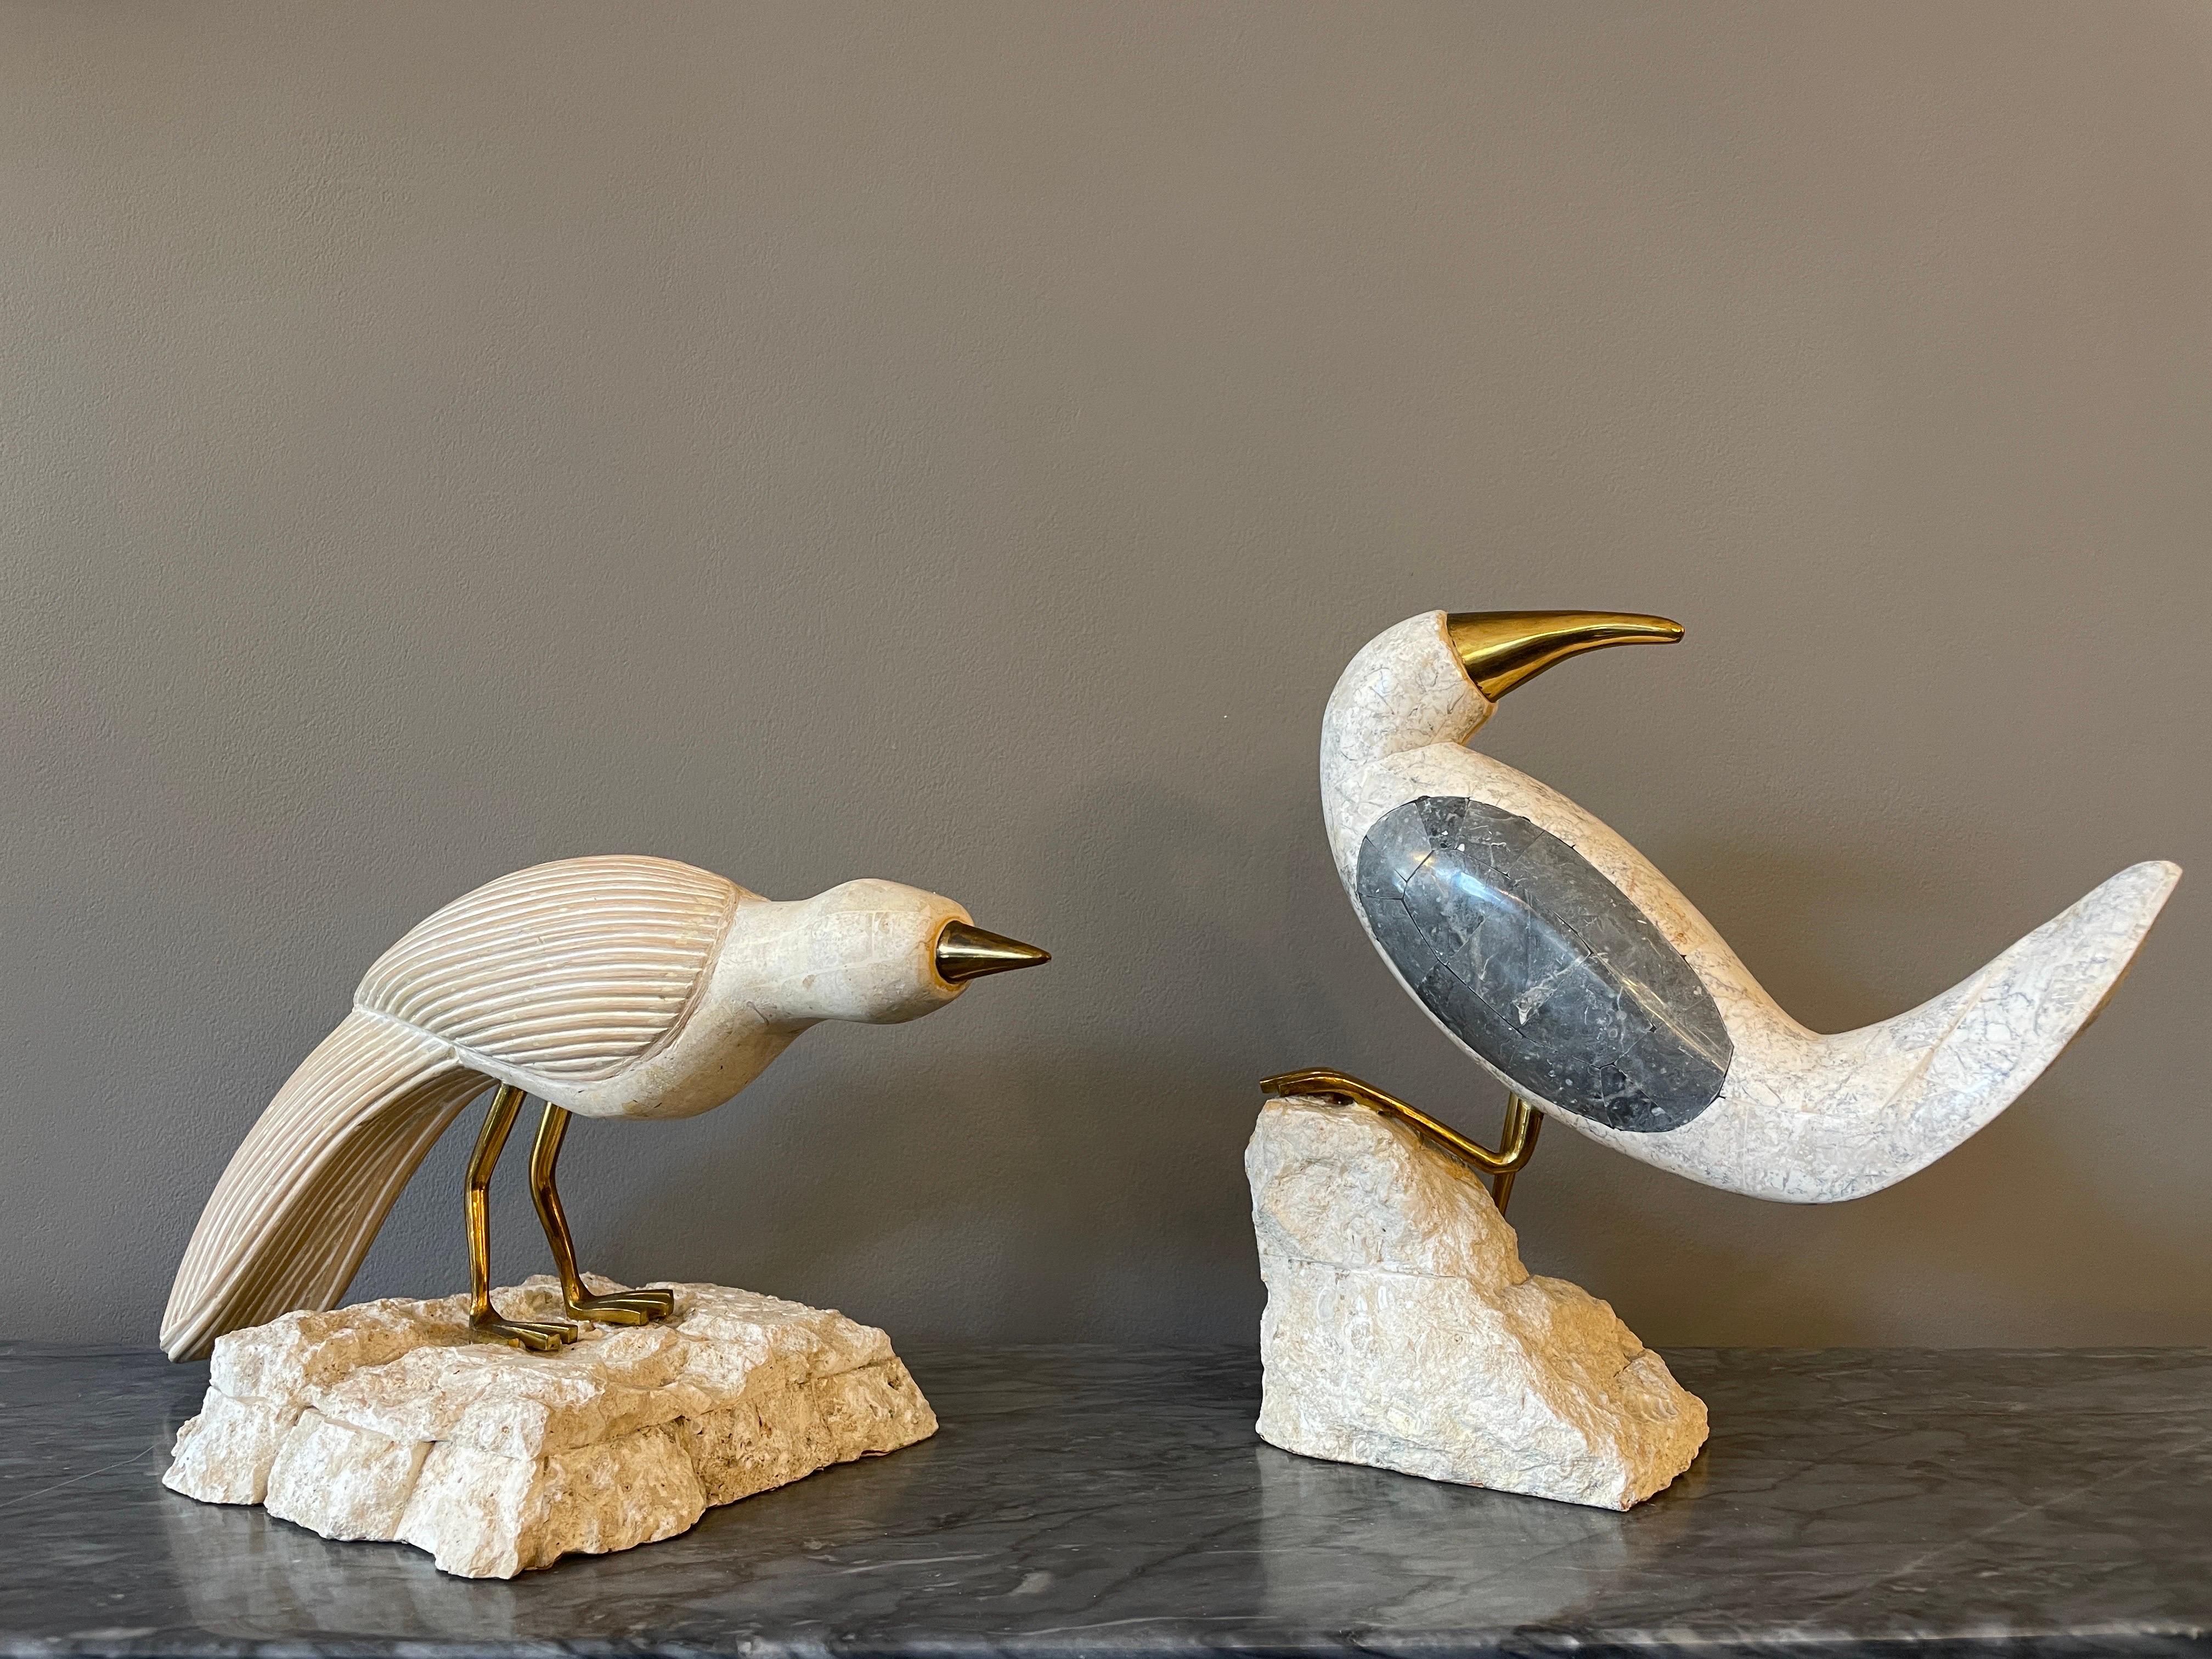 A set or matched pair of stone and tessellated marble birds with brass beaks and feet. Perched on stylised rocks. A tessellation or tiling is the covering of a surface, using one or more geometric shapes, called tiles, with no overlaps and no gaps.